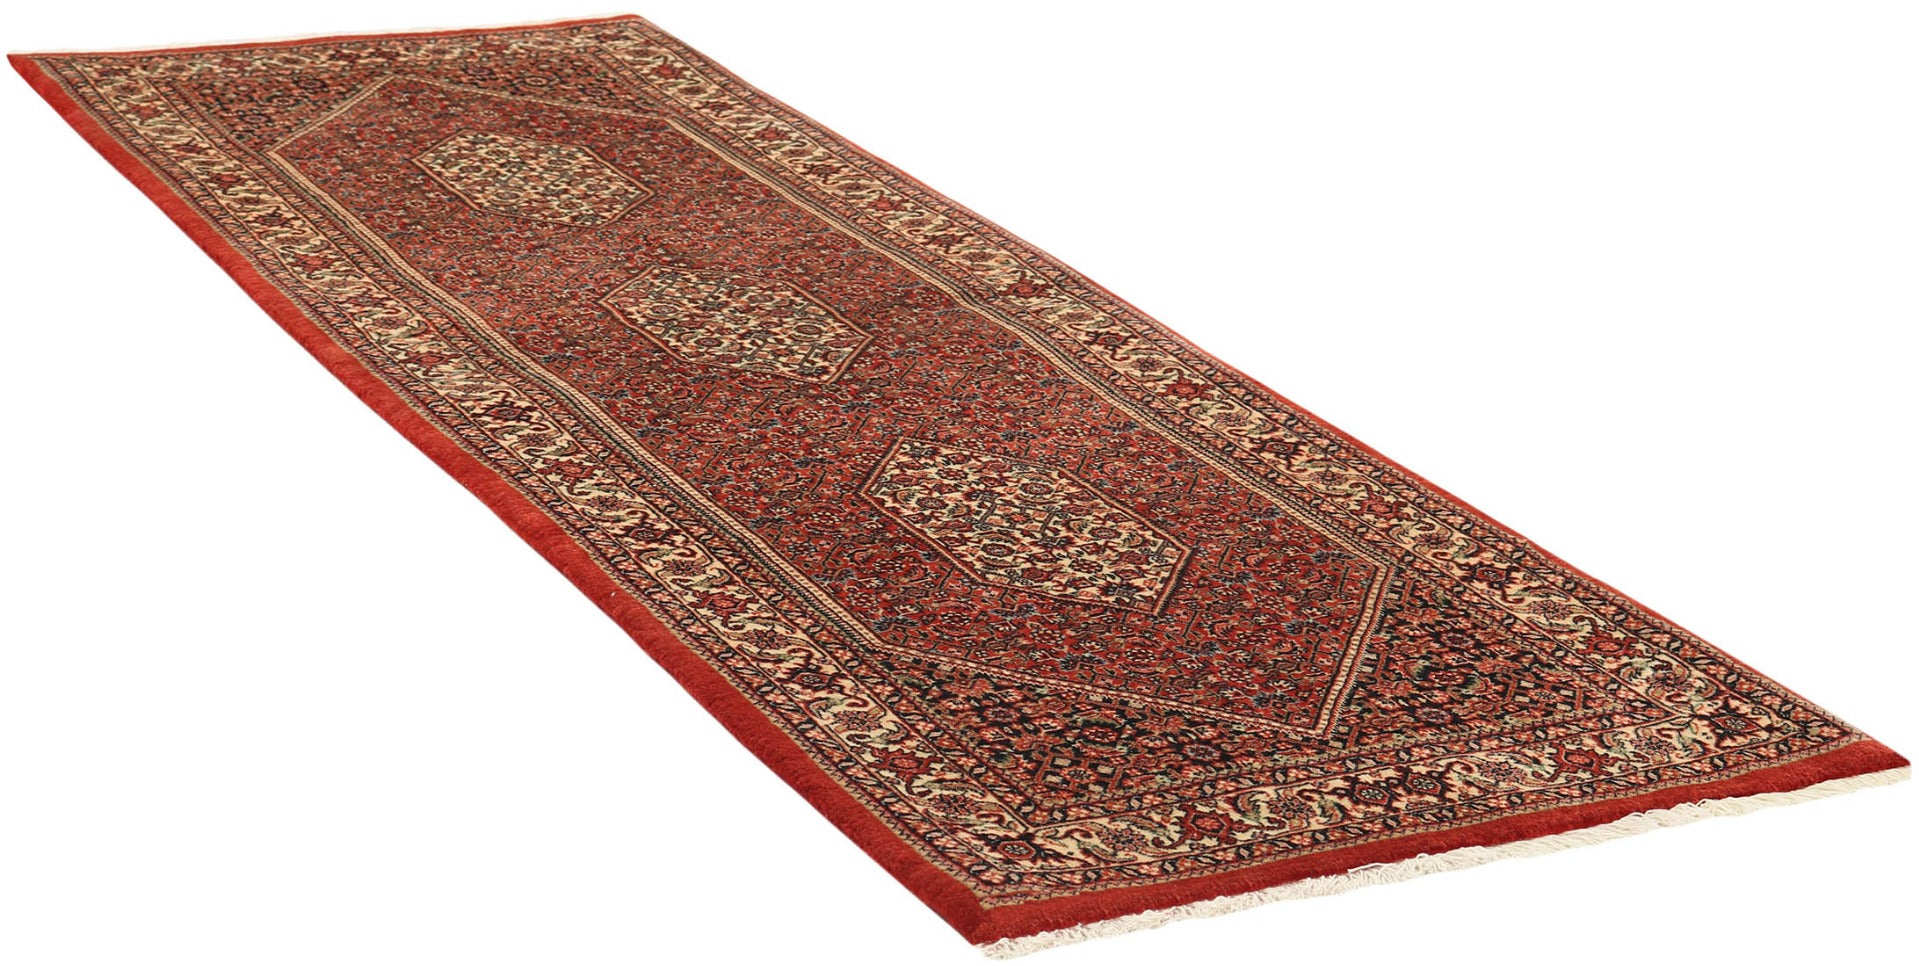 Red and cream persian wool and silk runner with traditional floral design
